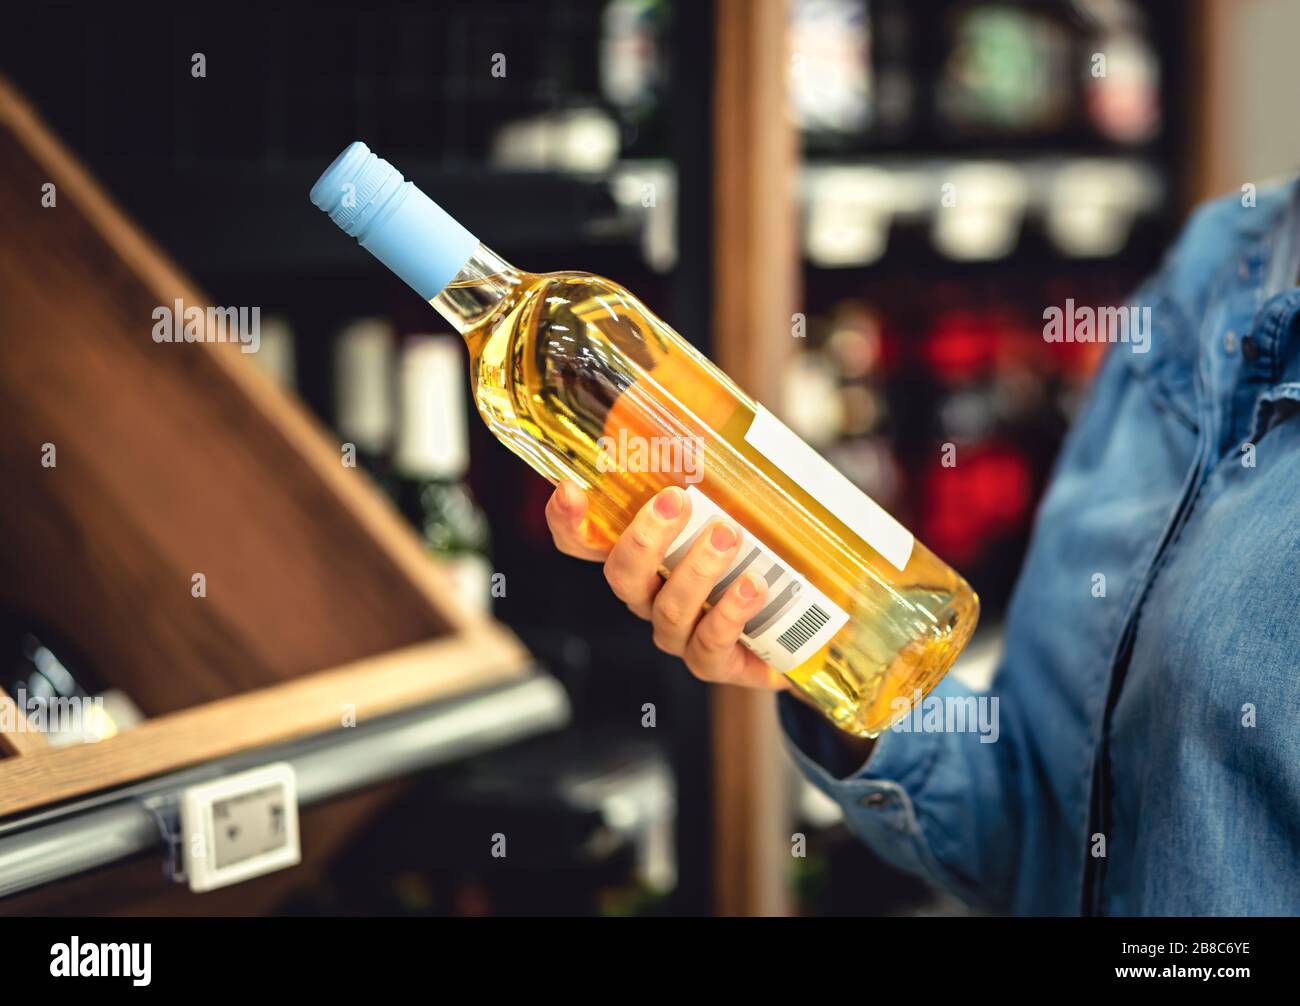 White wine bottle in hand in liquor store. Customer buying alcohol. Woman choosing the right bottle of chardonnay or riesling. Alcoholic beverages. Stock Photo